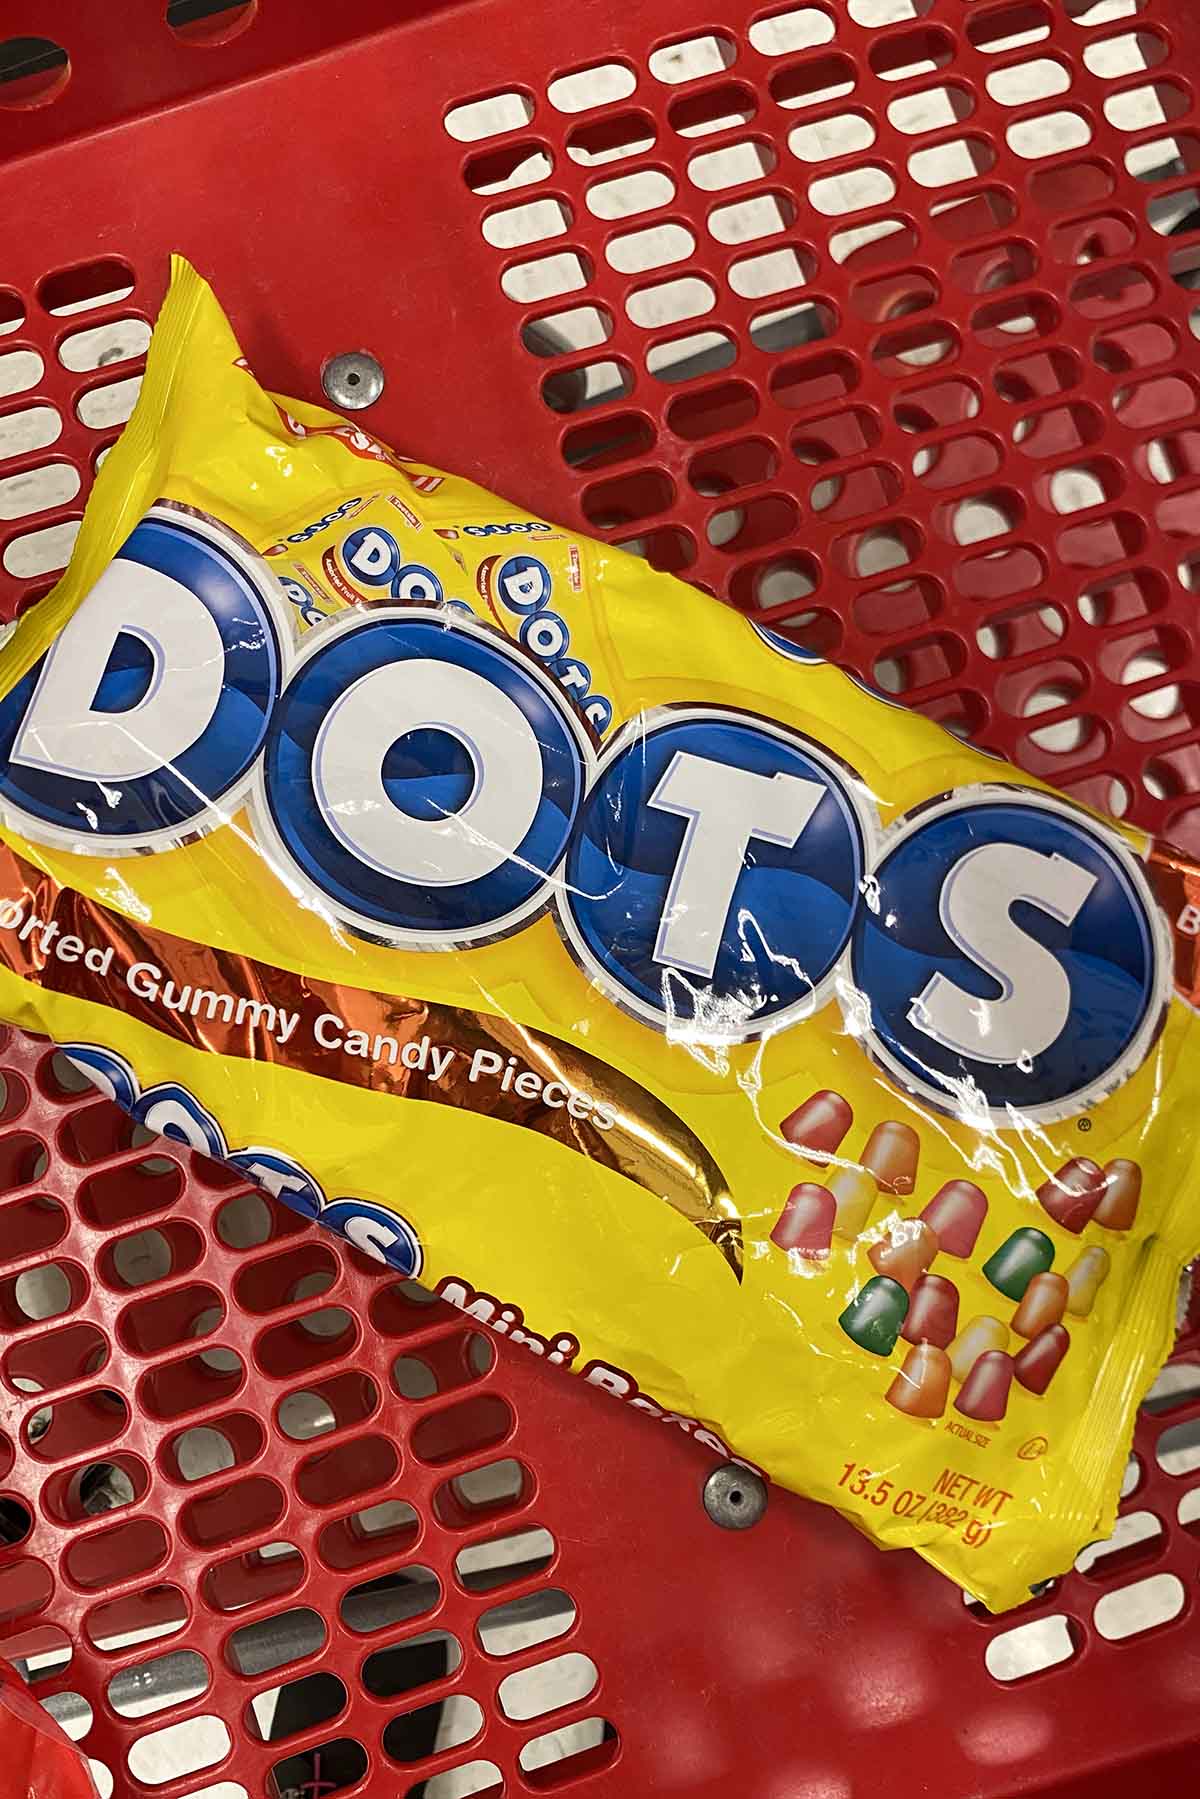 bag of Dots in a shopping cart